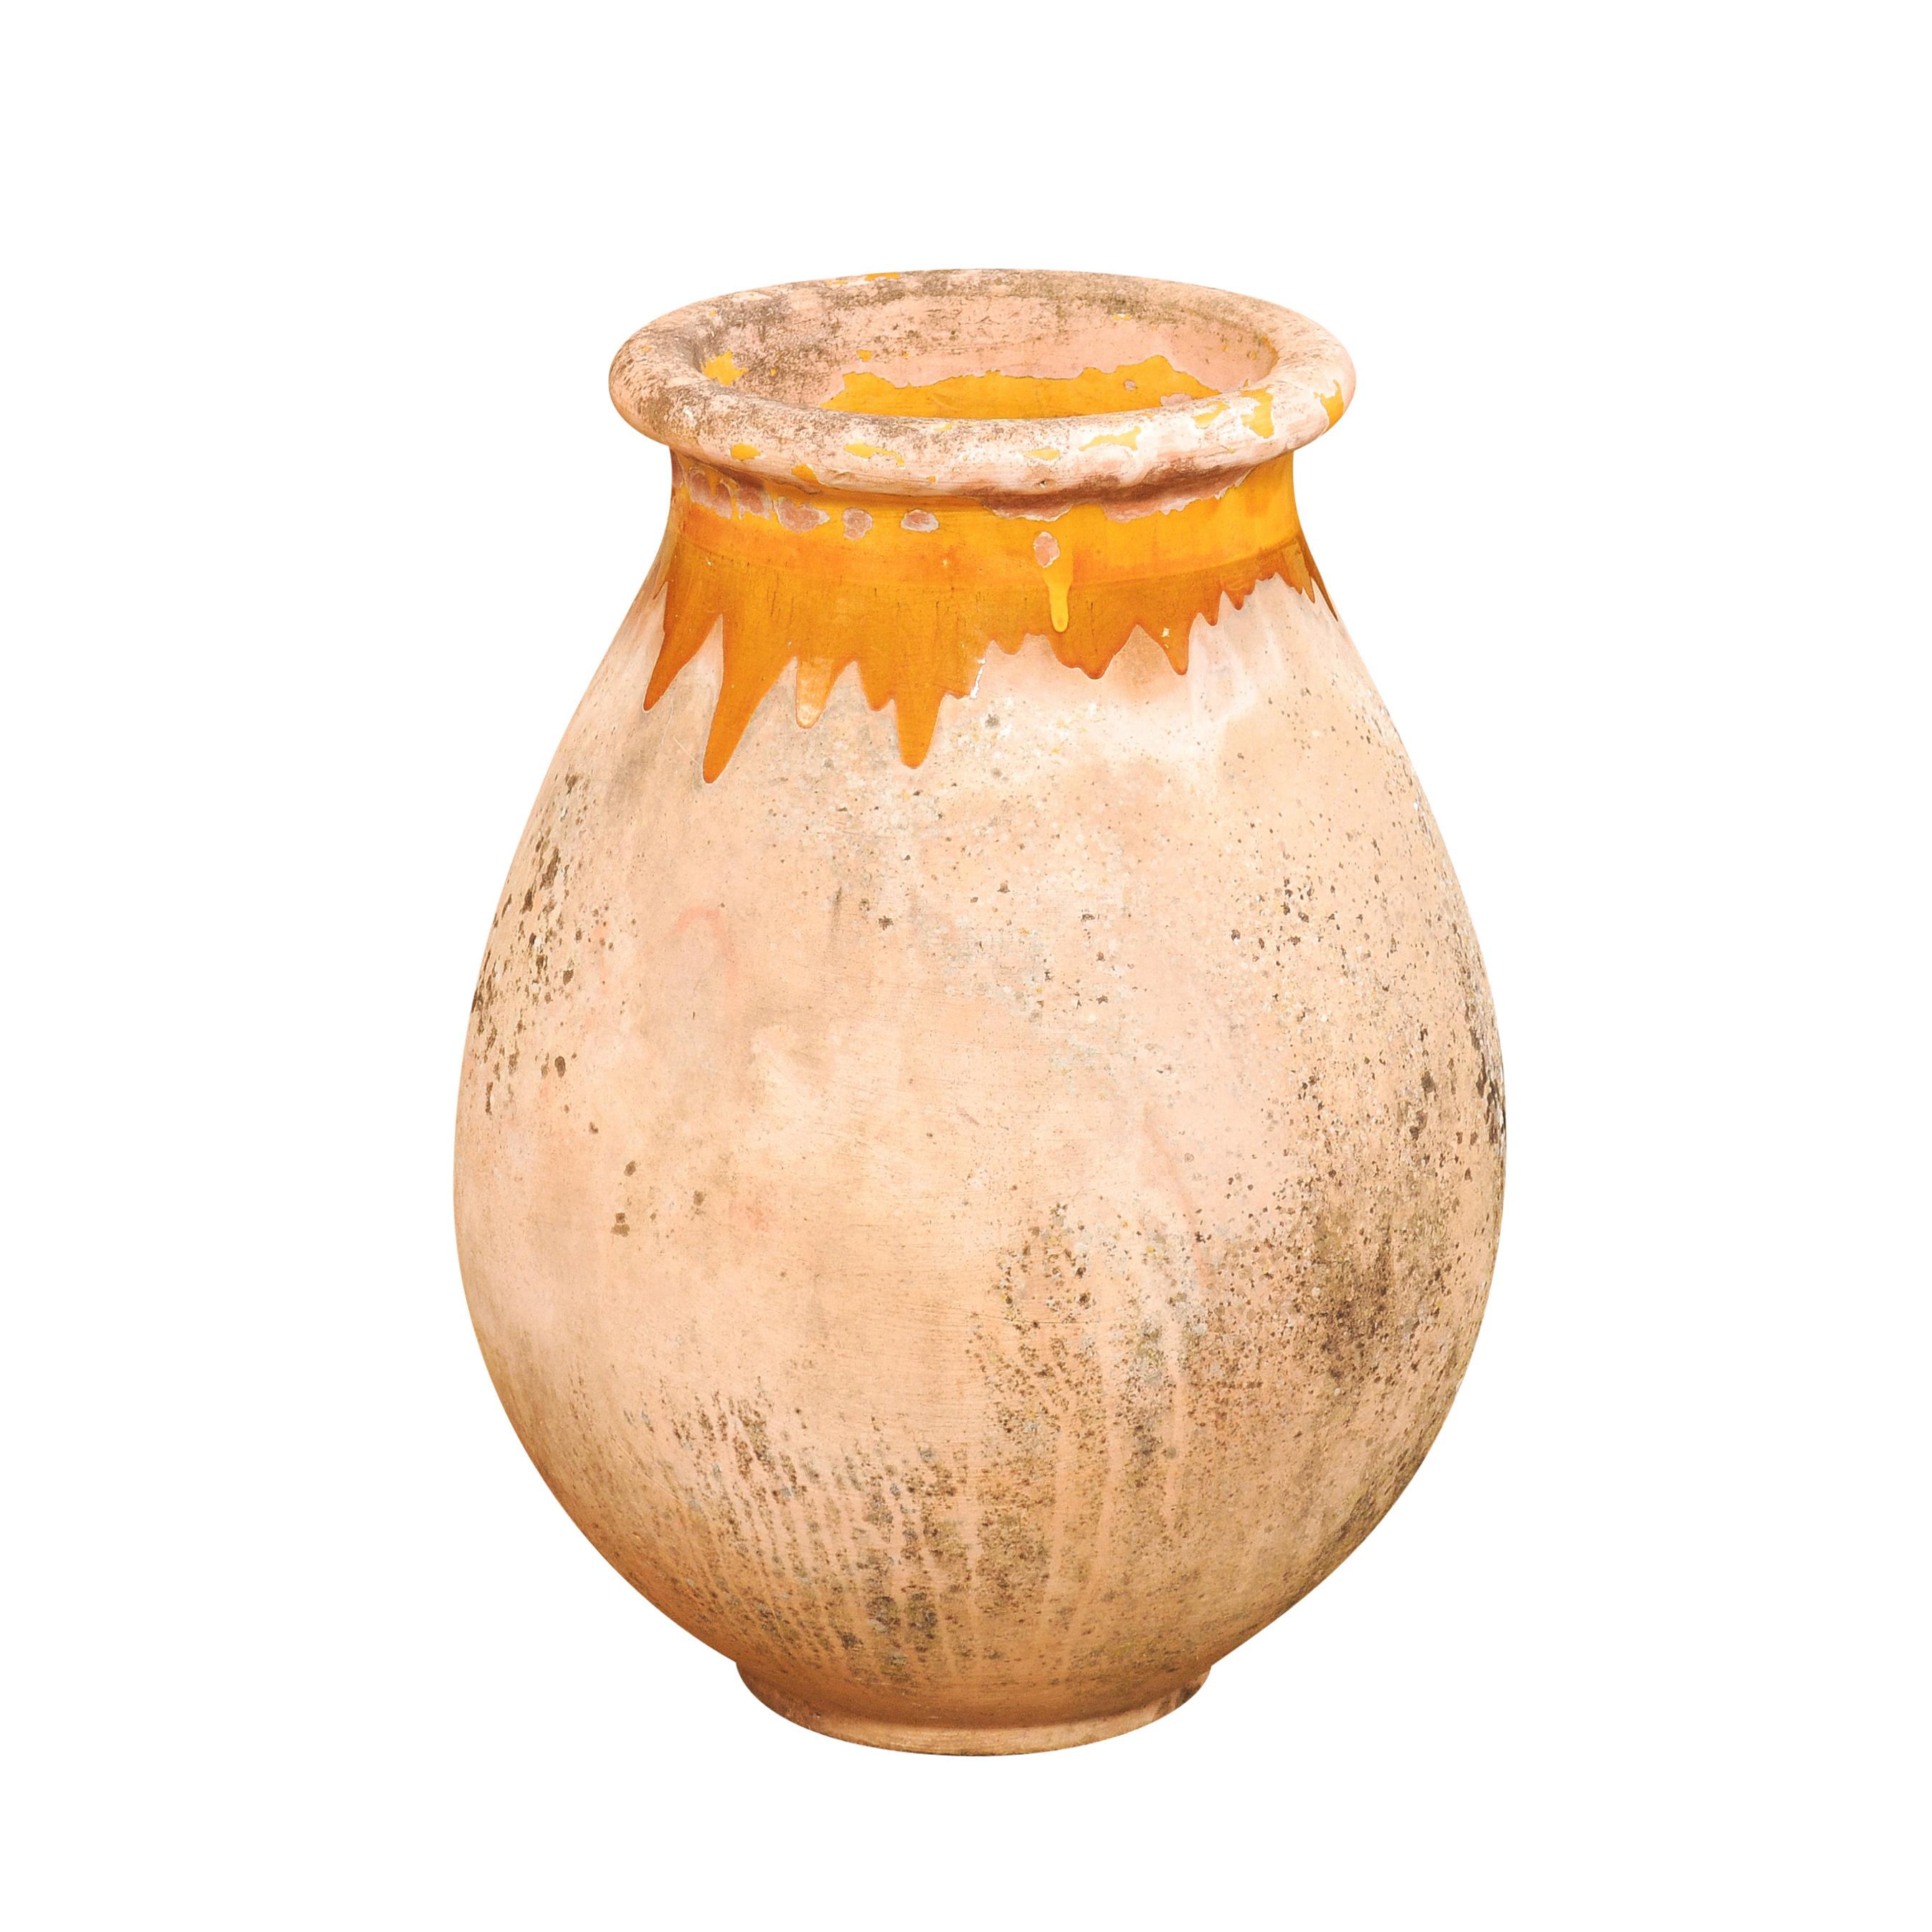 A large French Provincial Biot pottery jar from the 19th century with yellow glazed dripping and great rustic character. Elevate your garden or interior space with this French Provincial Biot pottery jar from the 19th century. With its yellow glazed